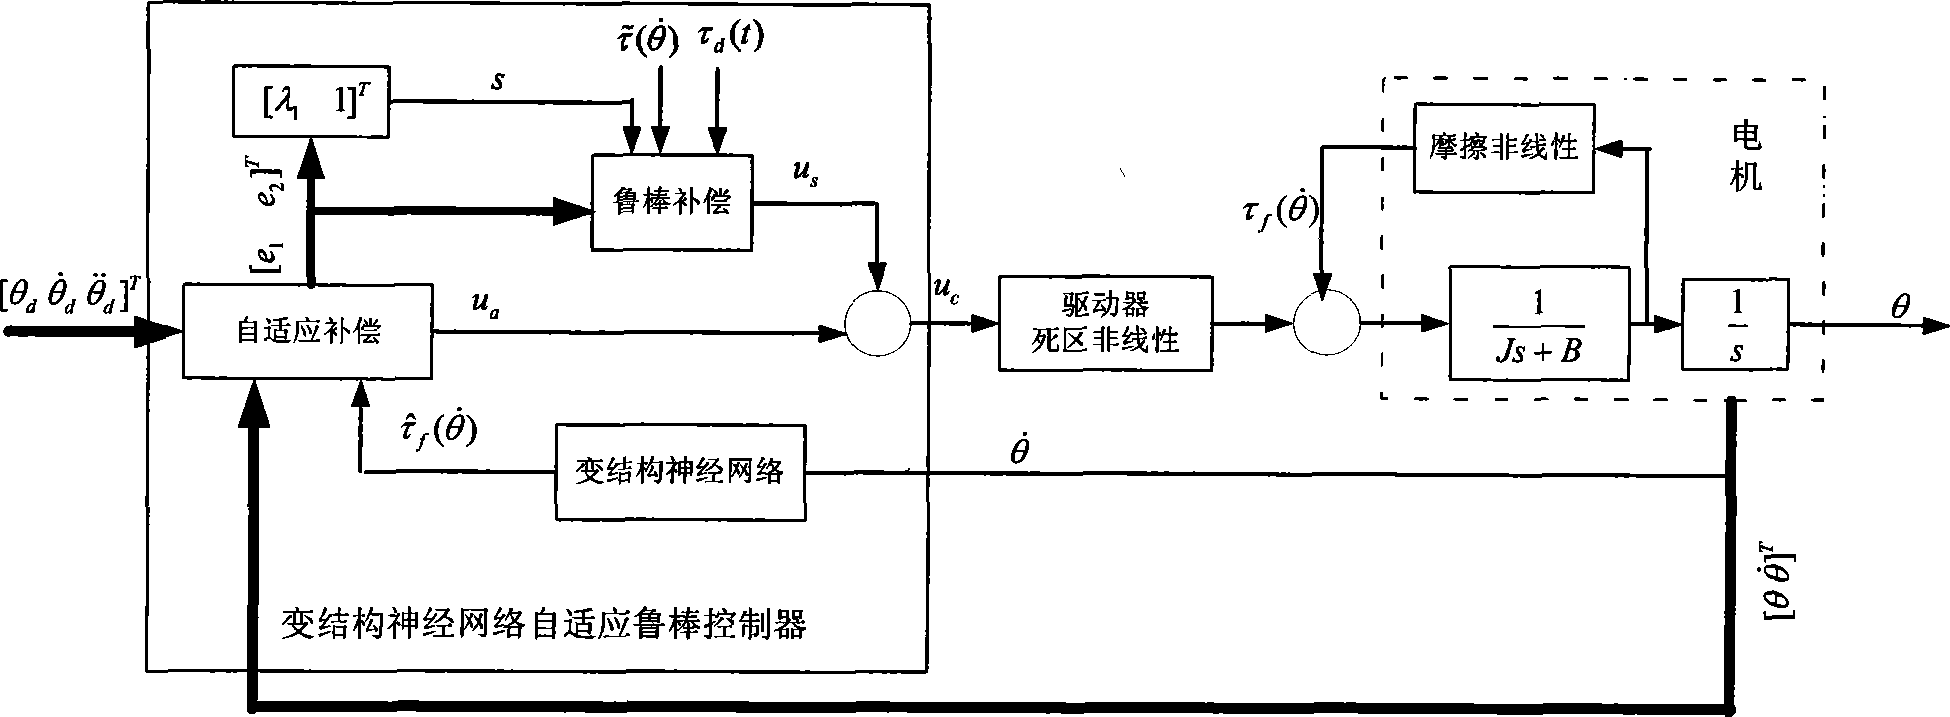 Essentially nonlinear compensation controller of servo system